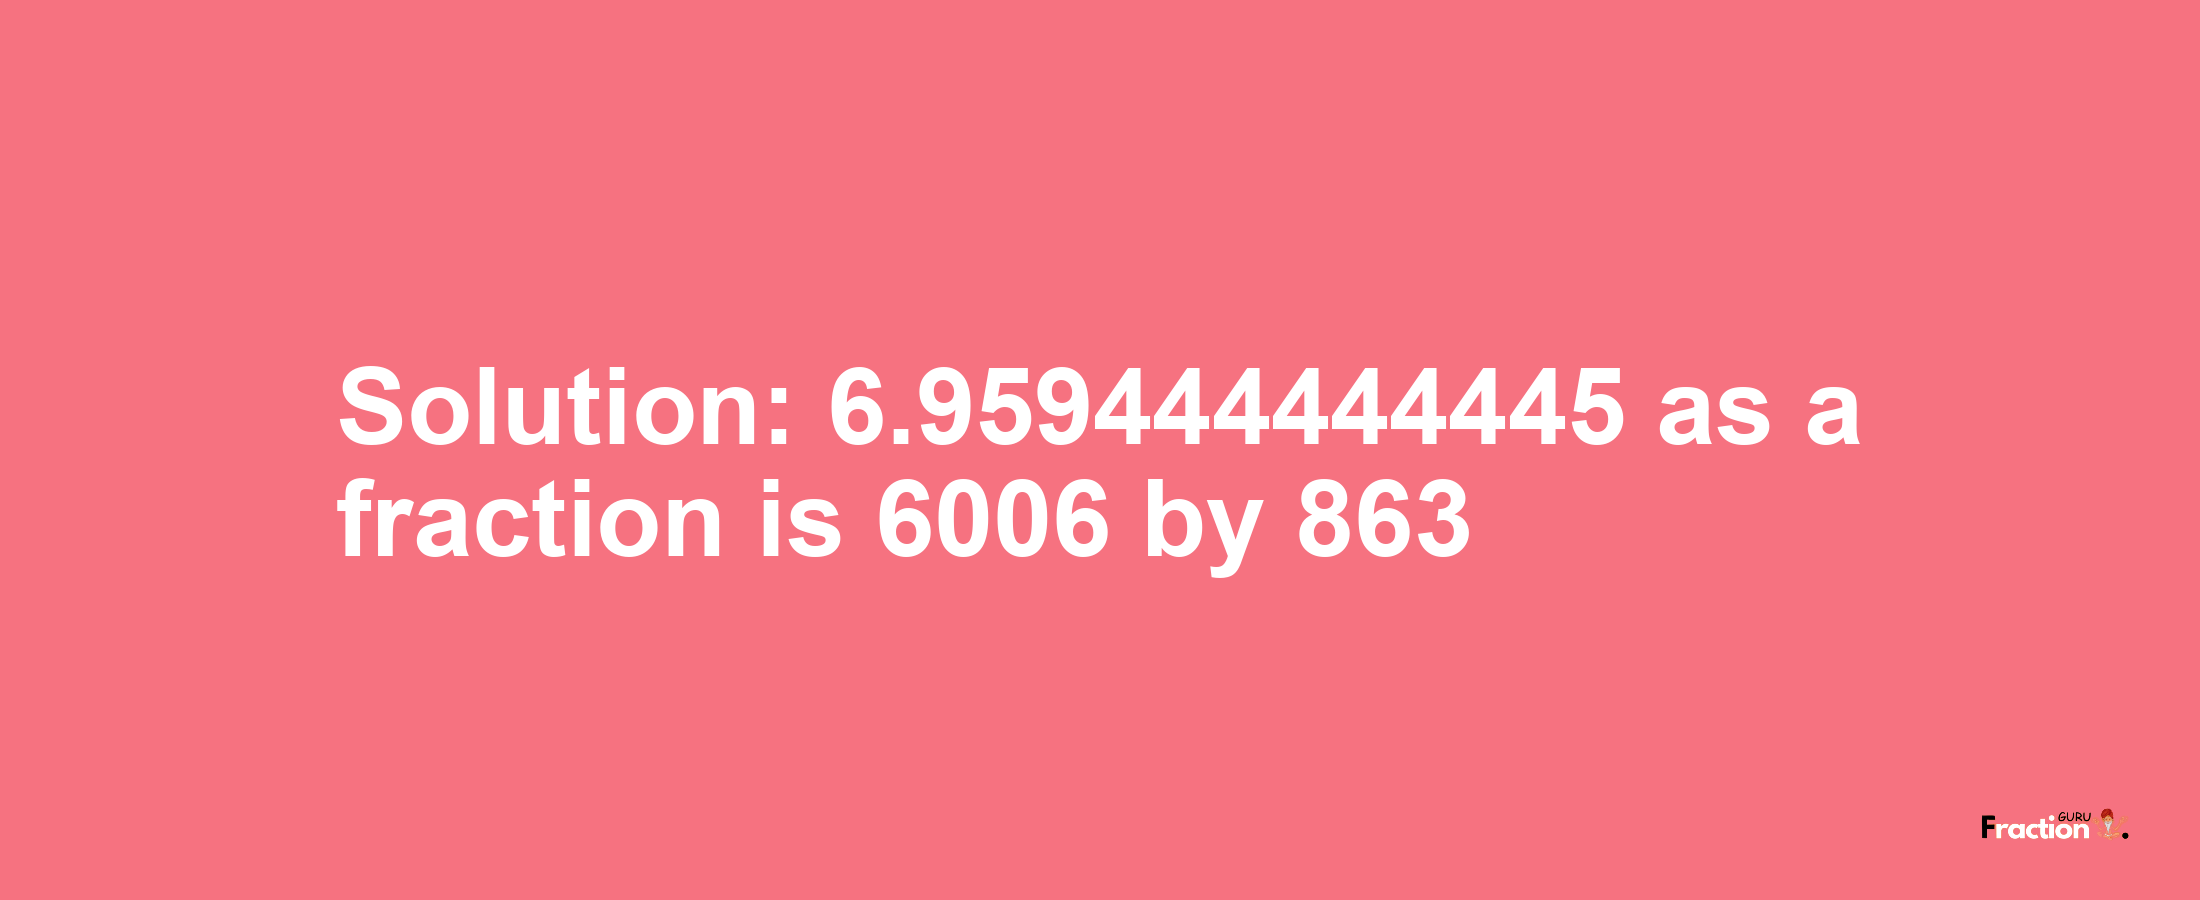 Solution:6.959444444445 as a fraction is 6006/863